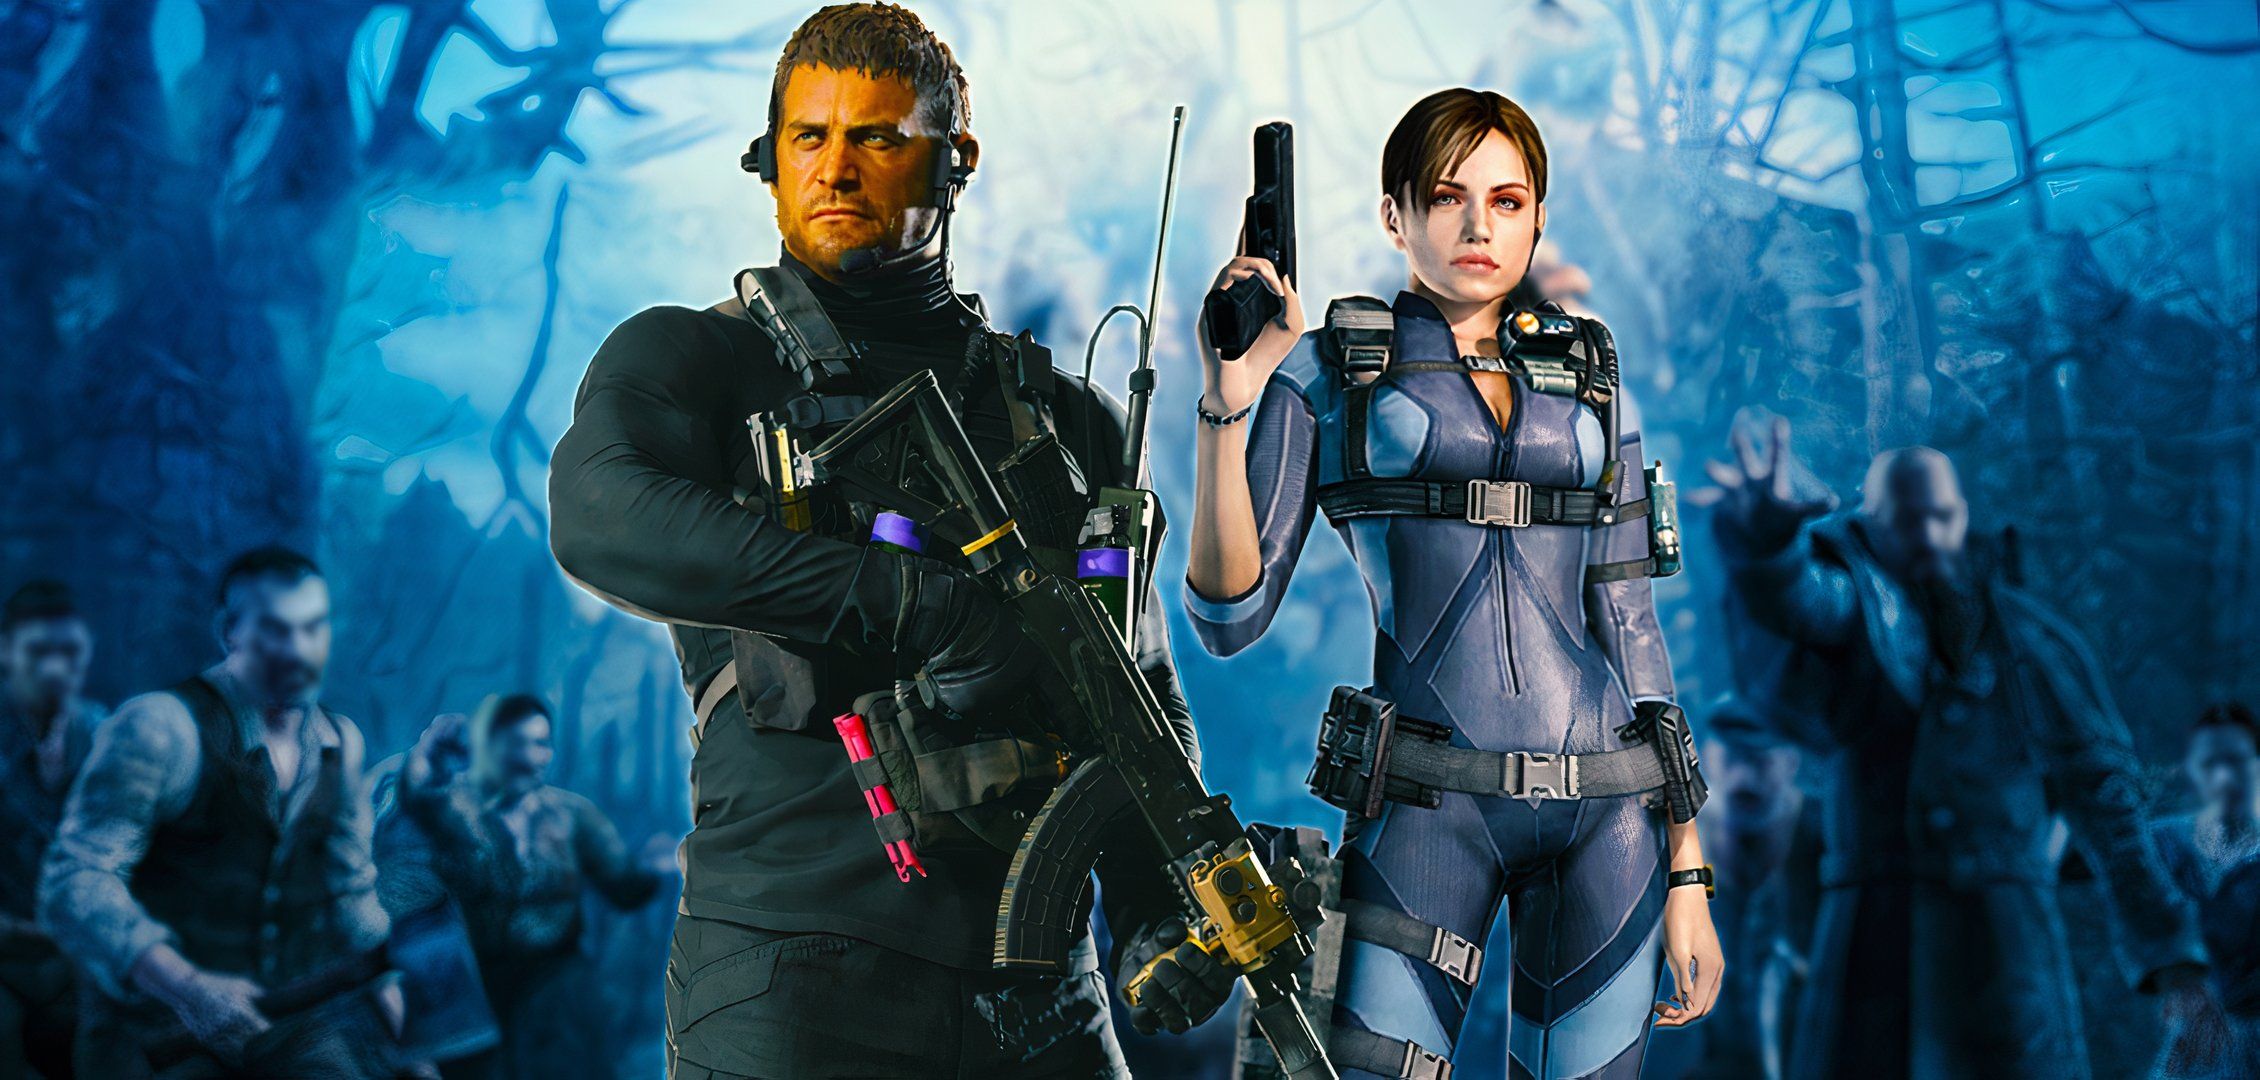 Jill Valentine and Chri Redfield from RE with zombies in the background